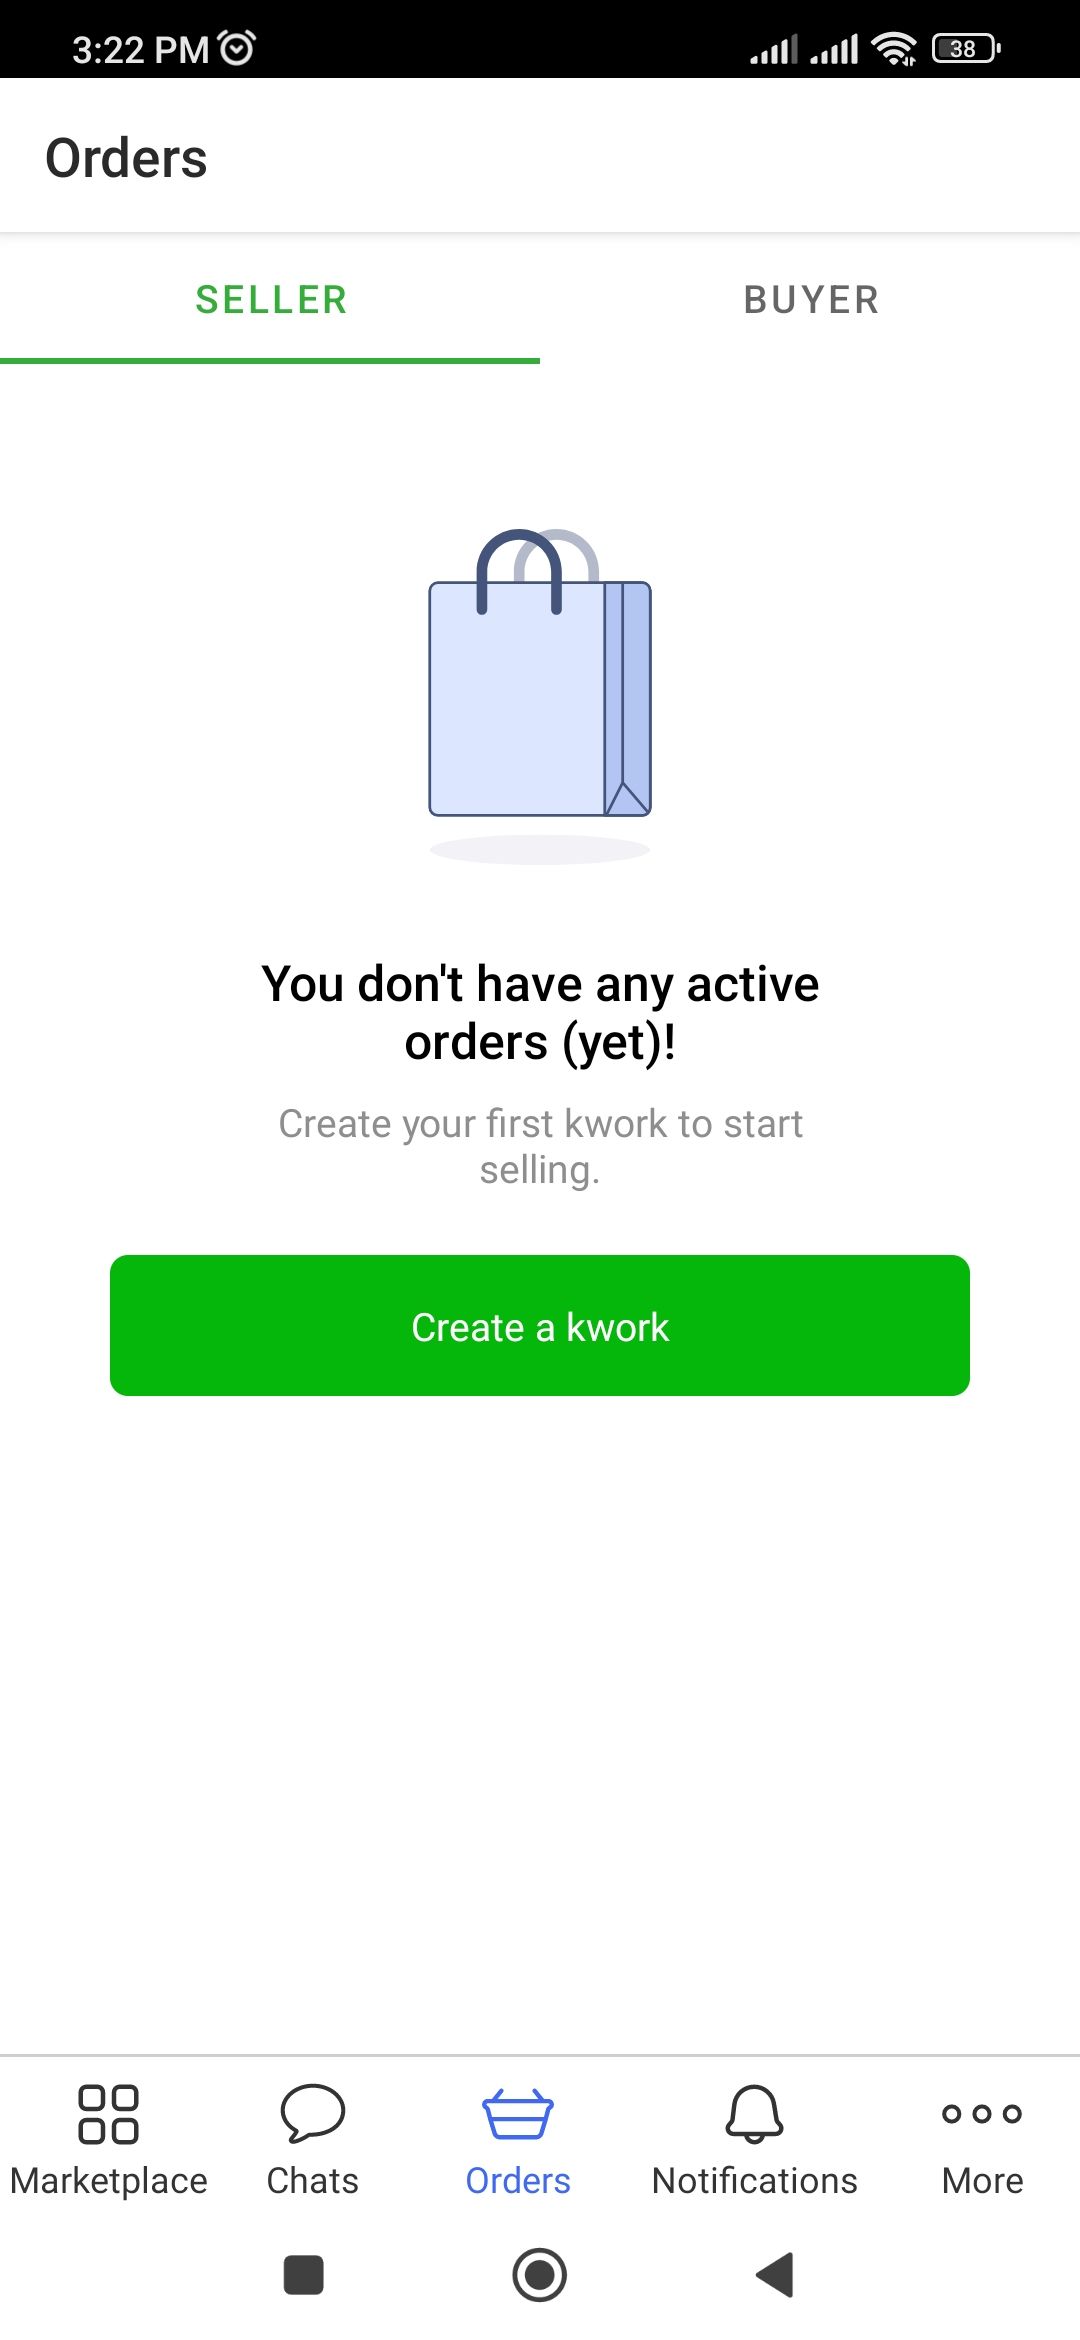 Orders page in the Kwork app